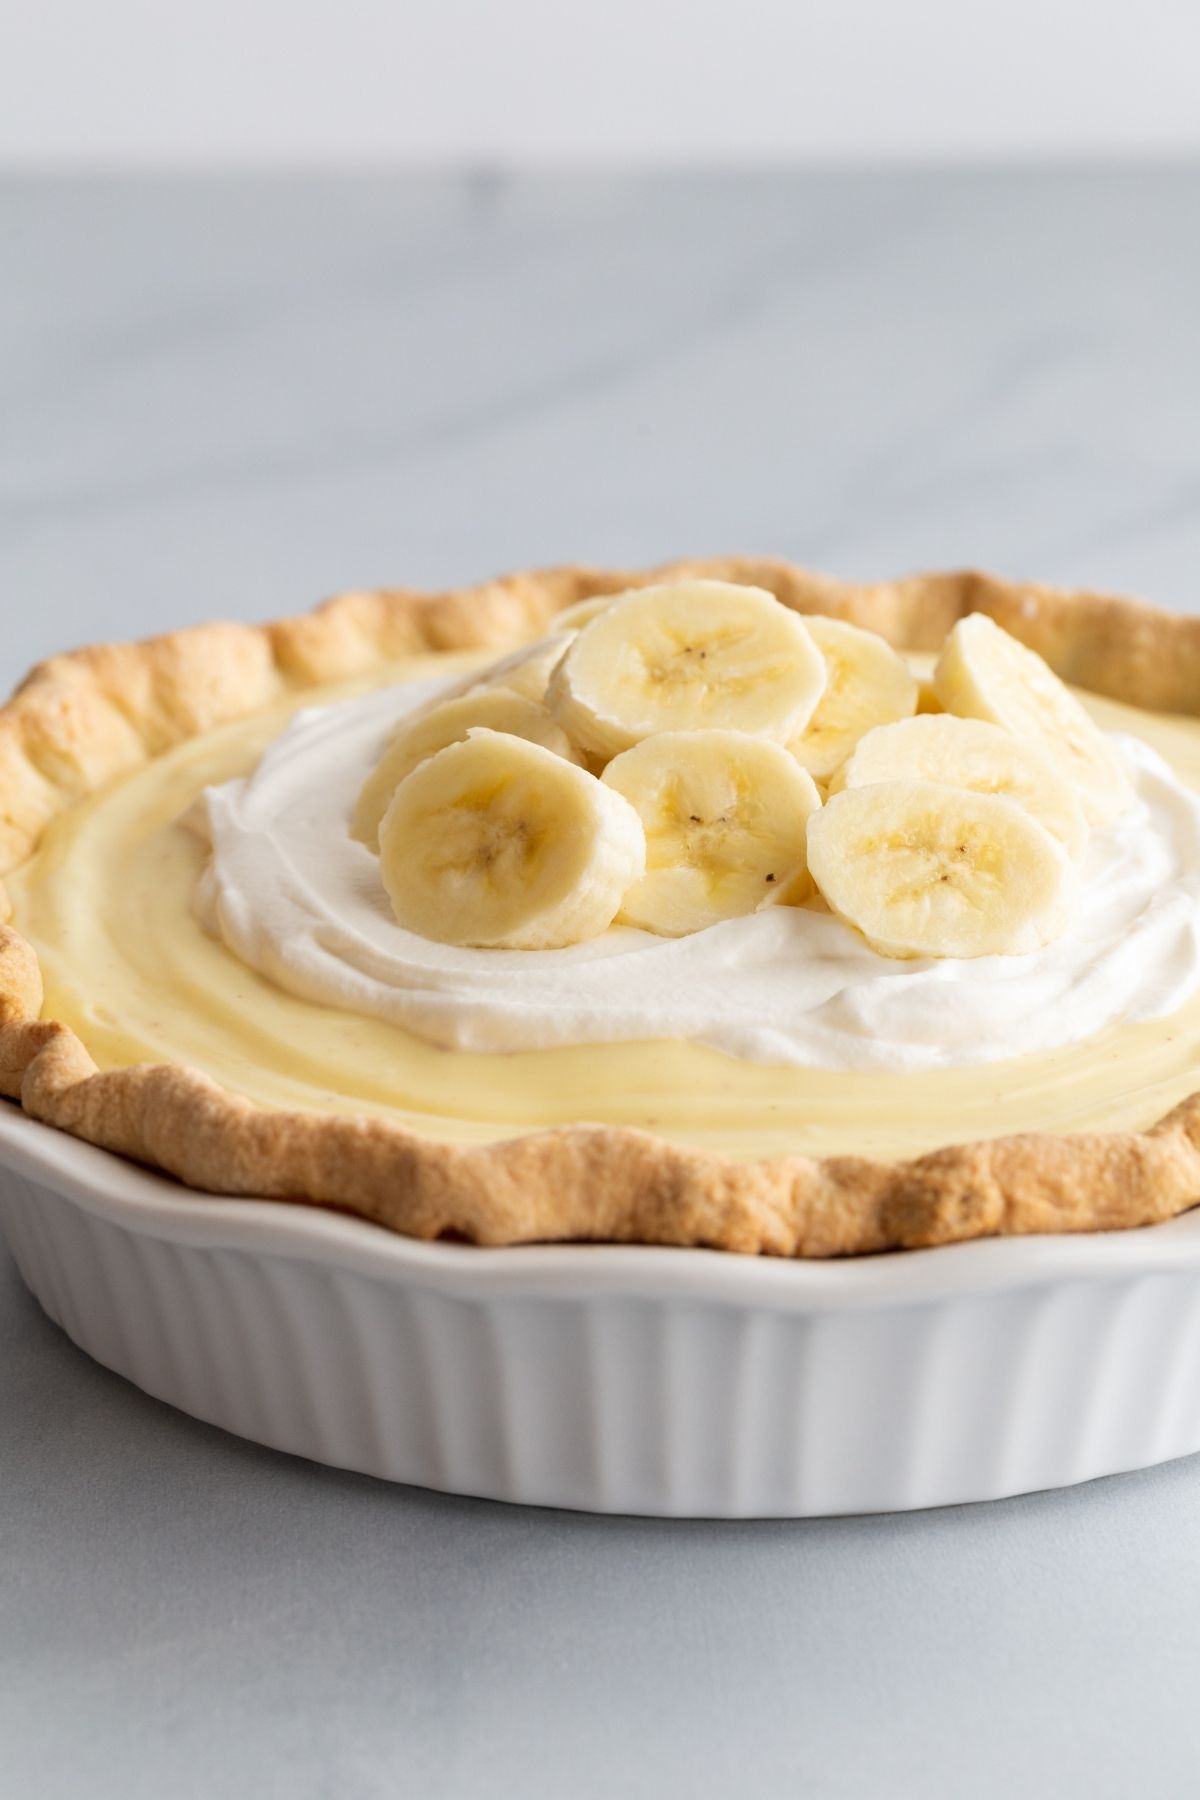 High angle view of banana cream pie in a white pie dish.